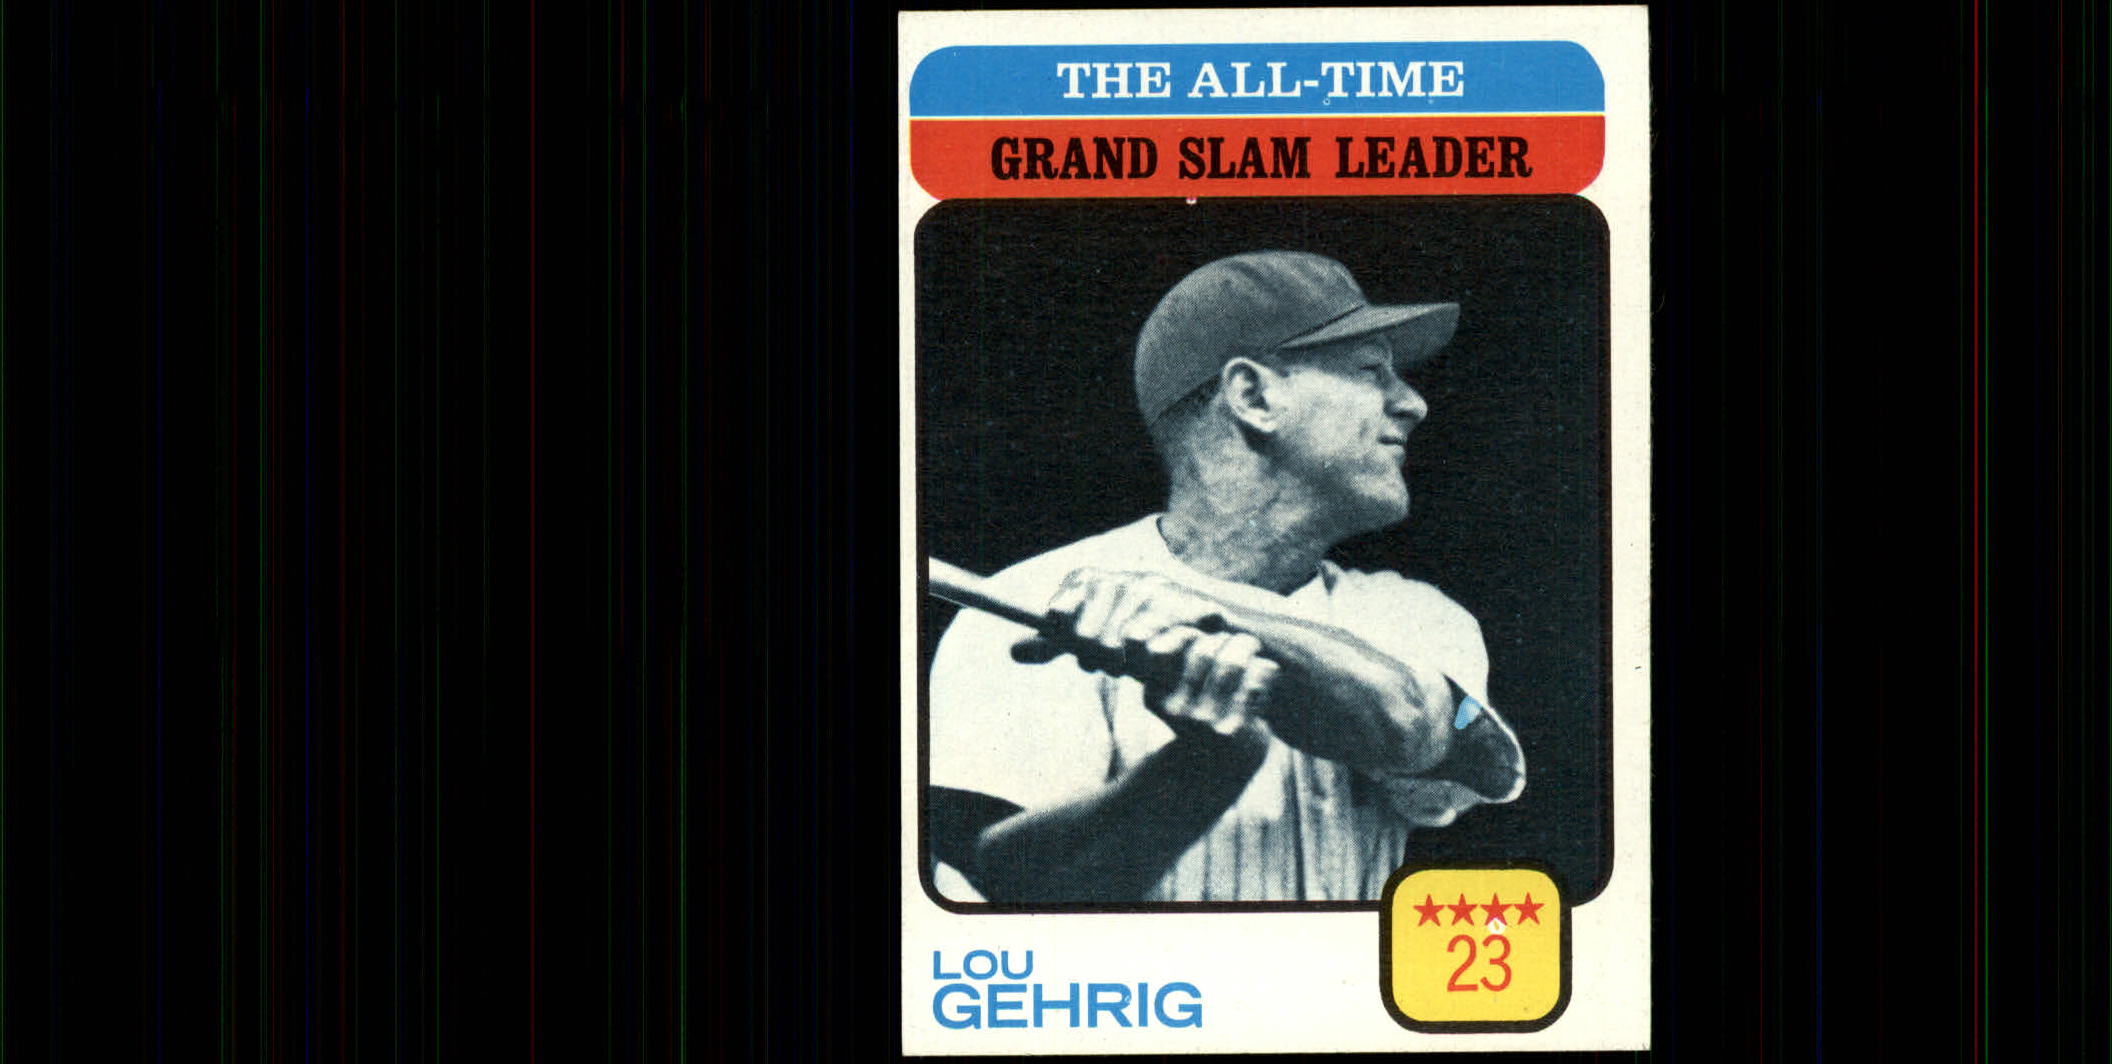 1973 Topps #472 Lou Gehrig/All-Time Grand Slam Leader